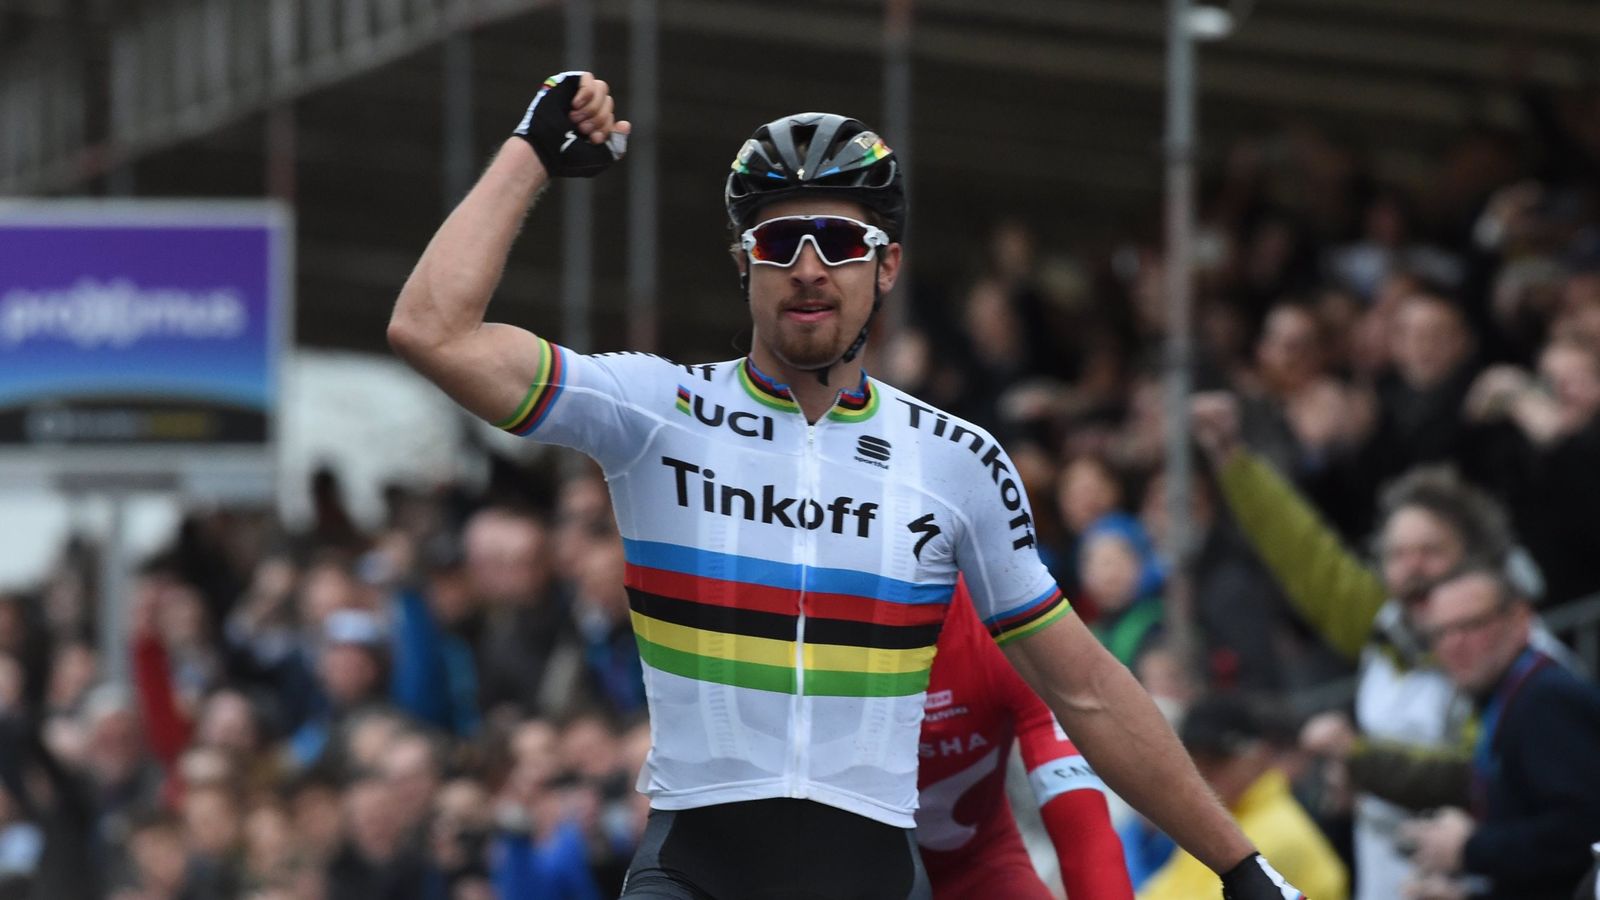 World champion Peter Sagan wins Gent-Wevelgem for second time | Cycling ...